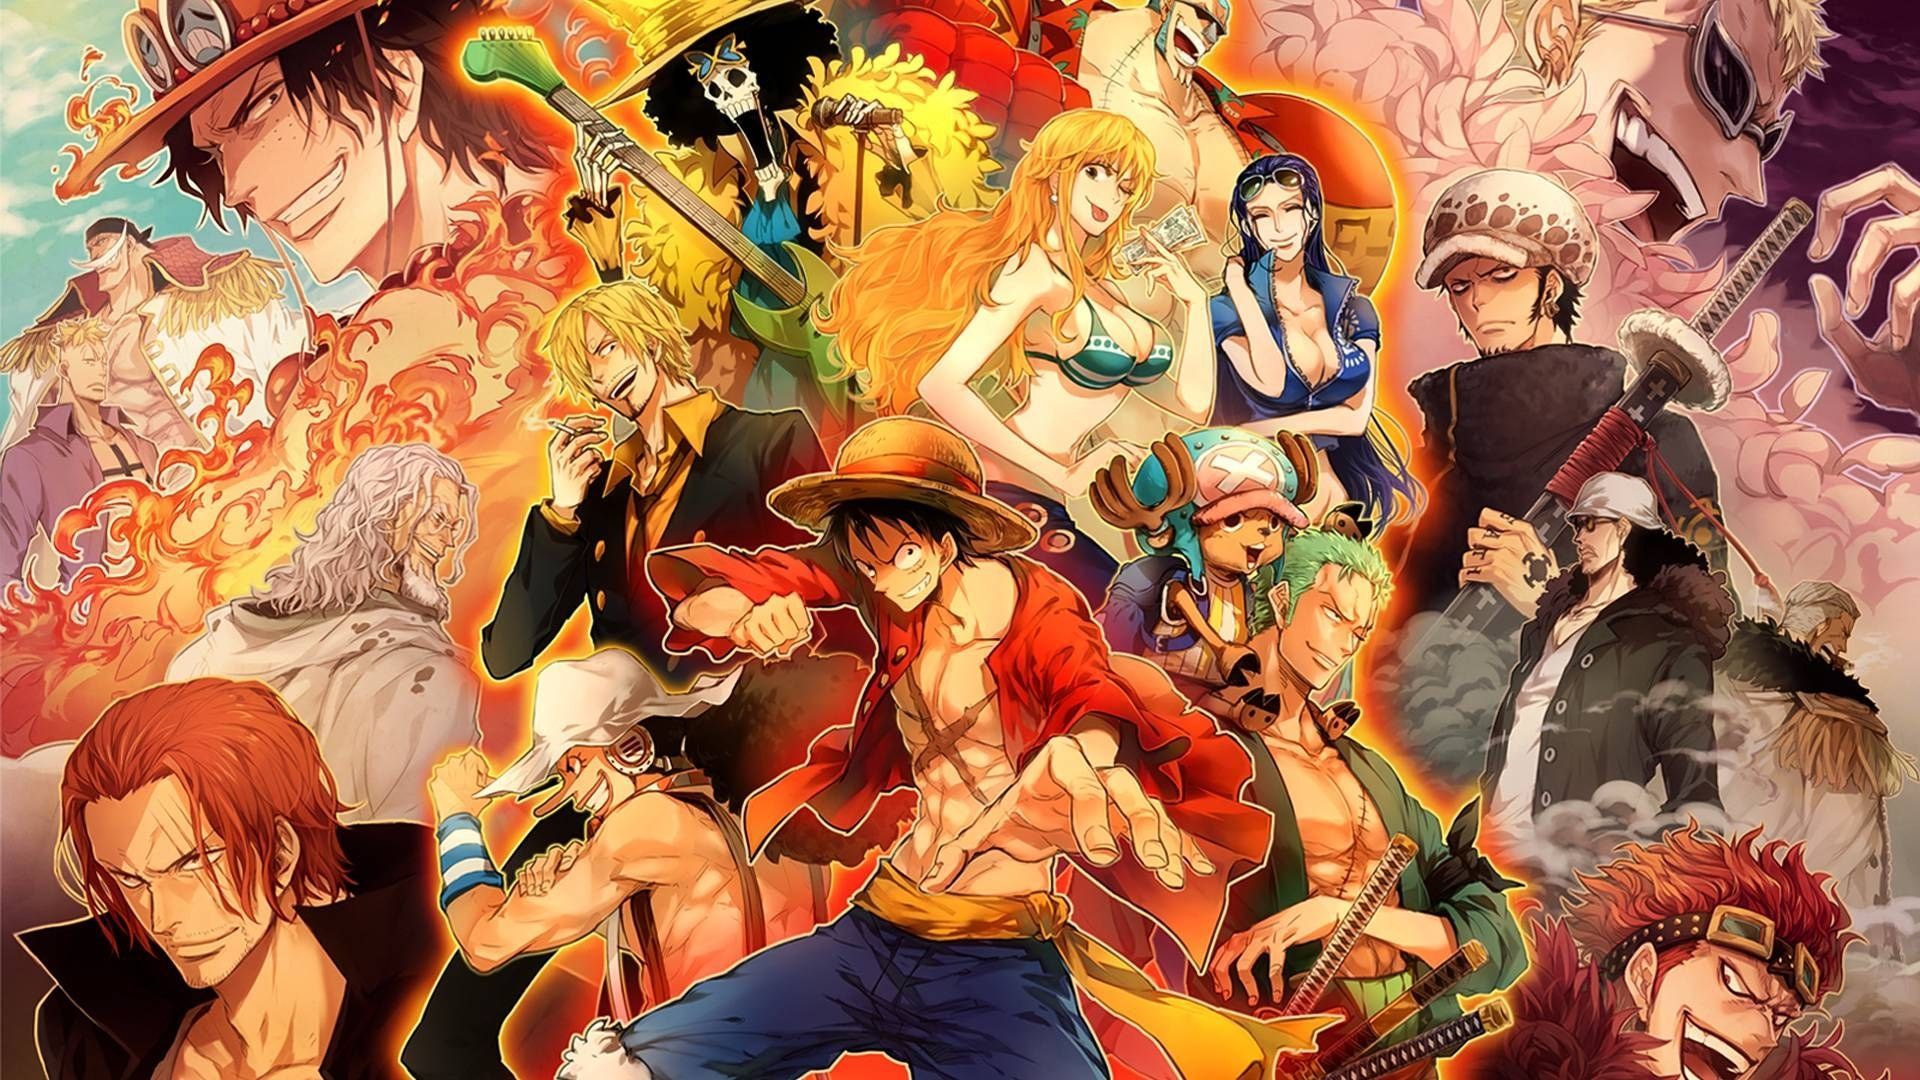 Best One Piece New World Wallpaper FULL HD 1920×1080 For PC Desktop. One piece image, One piece manga, One piece new world